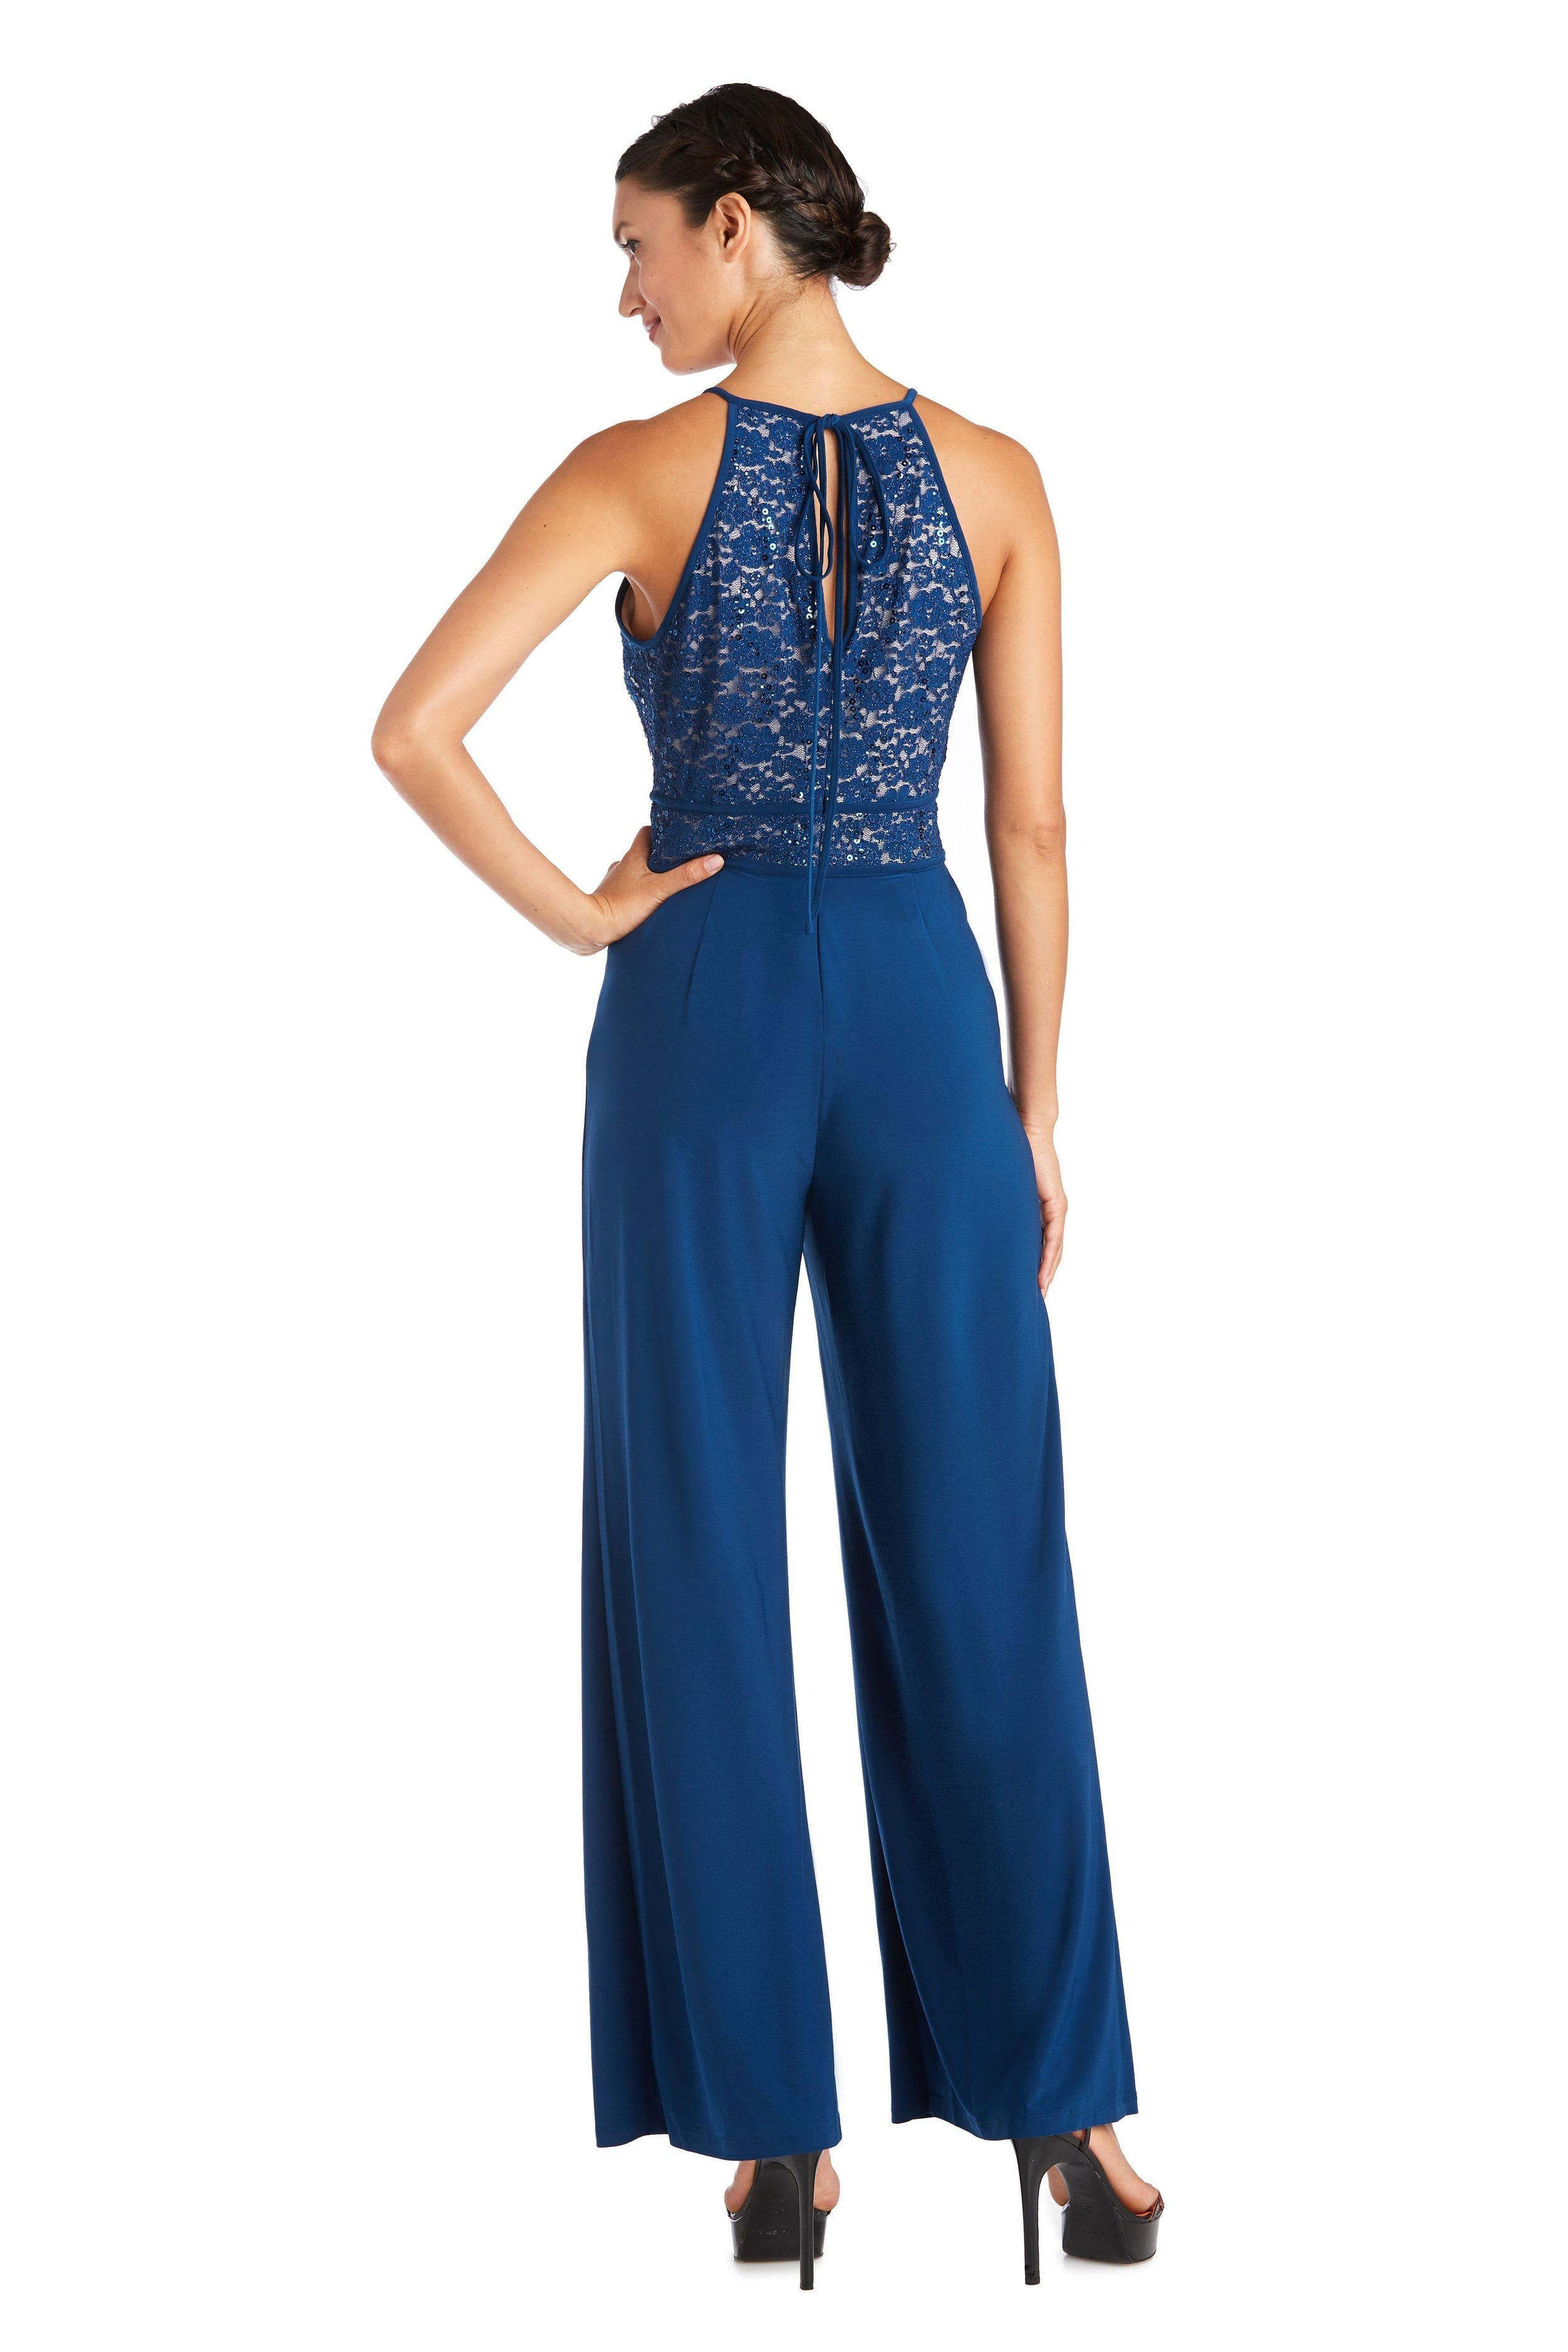 Nightway Lace Pant Jumpsuit Formal 21508 - The Dress Outlet